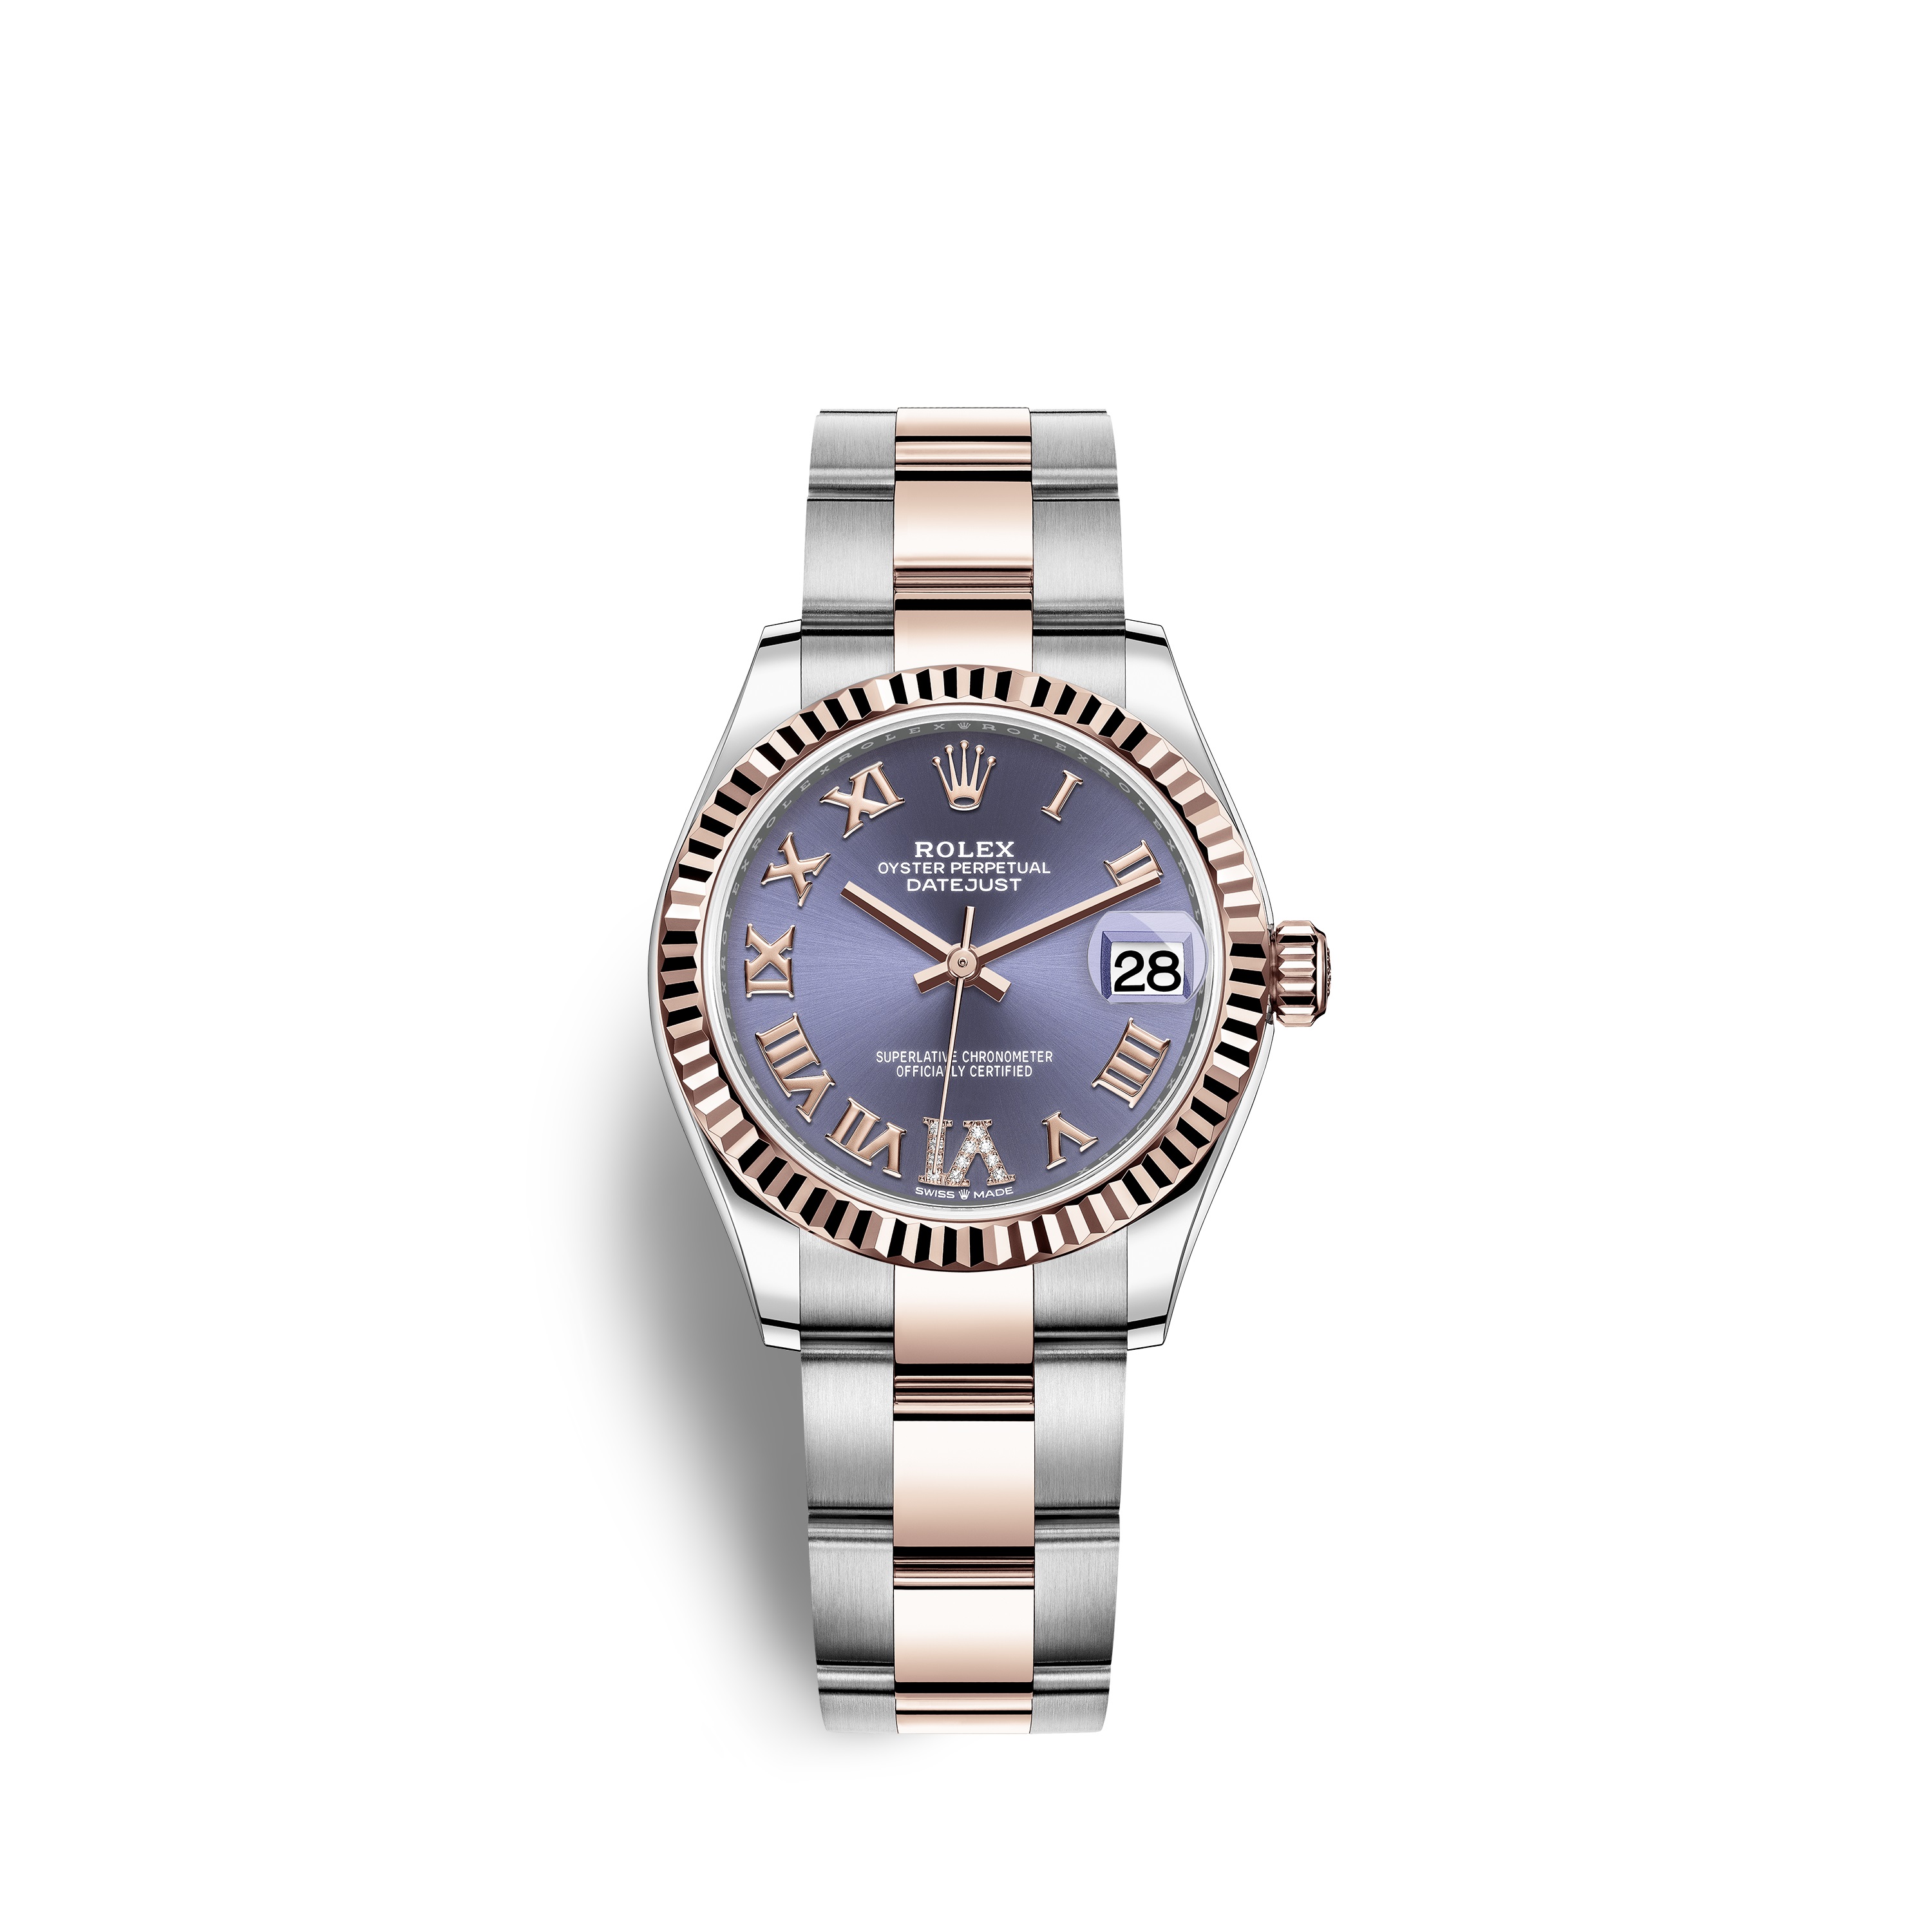 Datejust 31 278271 Rose Gold & Stainless Steel Watch (Aubergine Set with Diamonds)